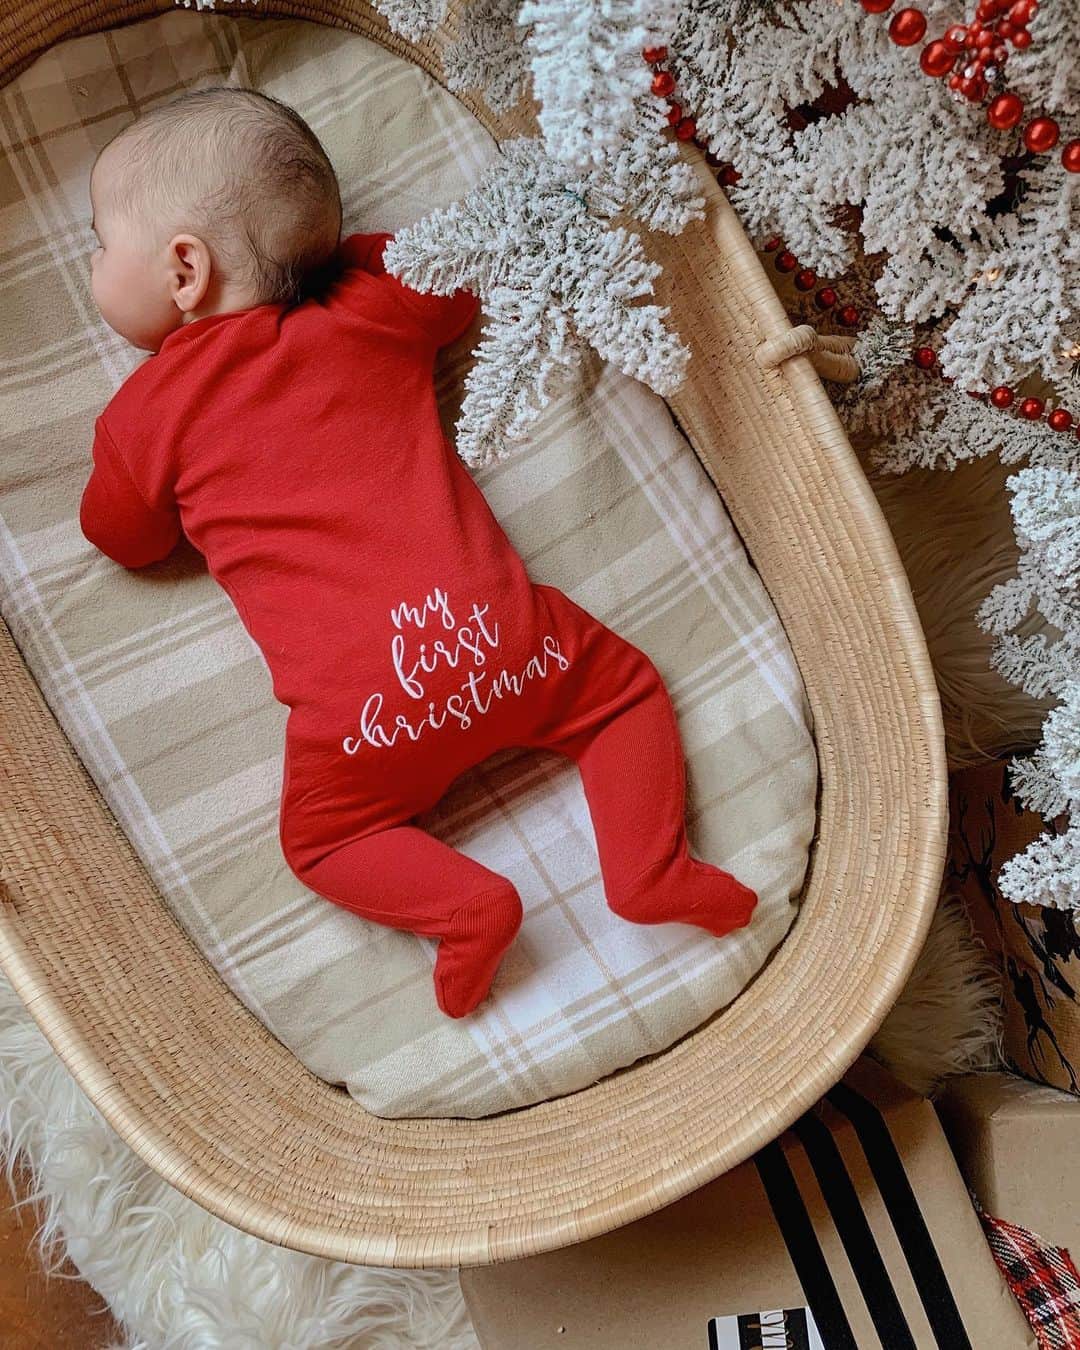 carlyのインスタグラム：「Snoozing his way through Christmas Day ❤️ I couldn’t ask for a better gift, being his mama is truly an honor and my greatest accomplishment. Merry Christmas, ig fam! #babysfirstchristmas #sharemypbk」